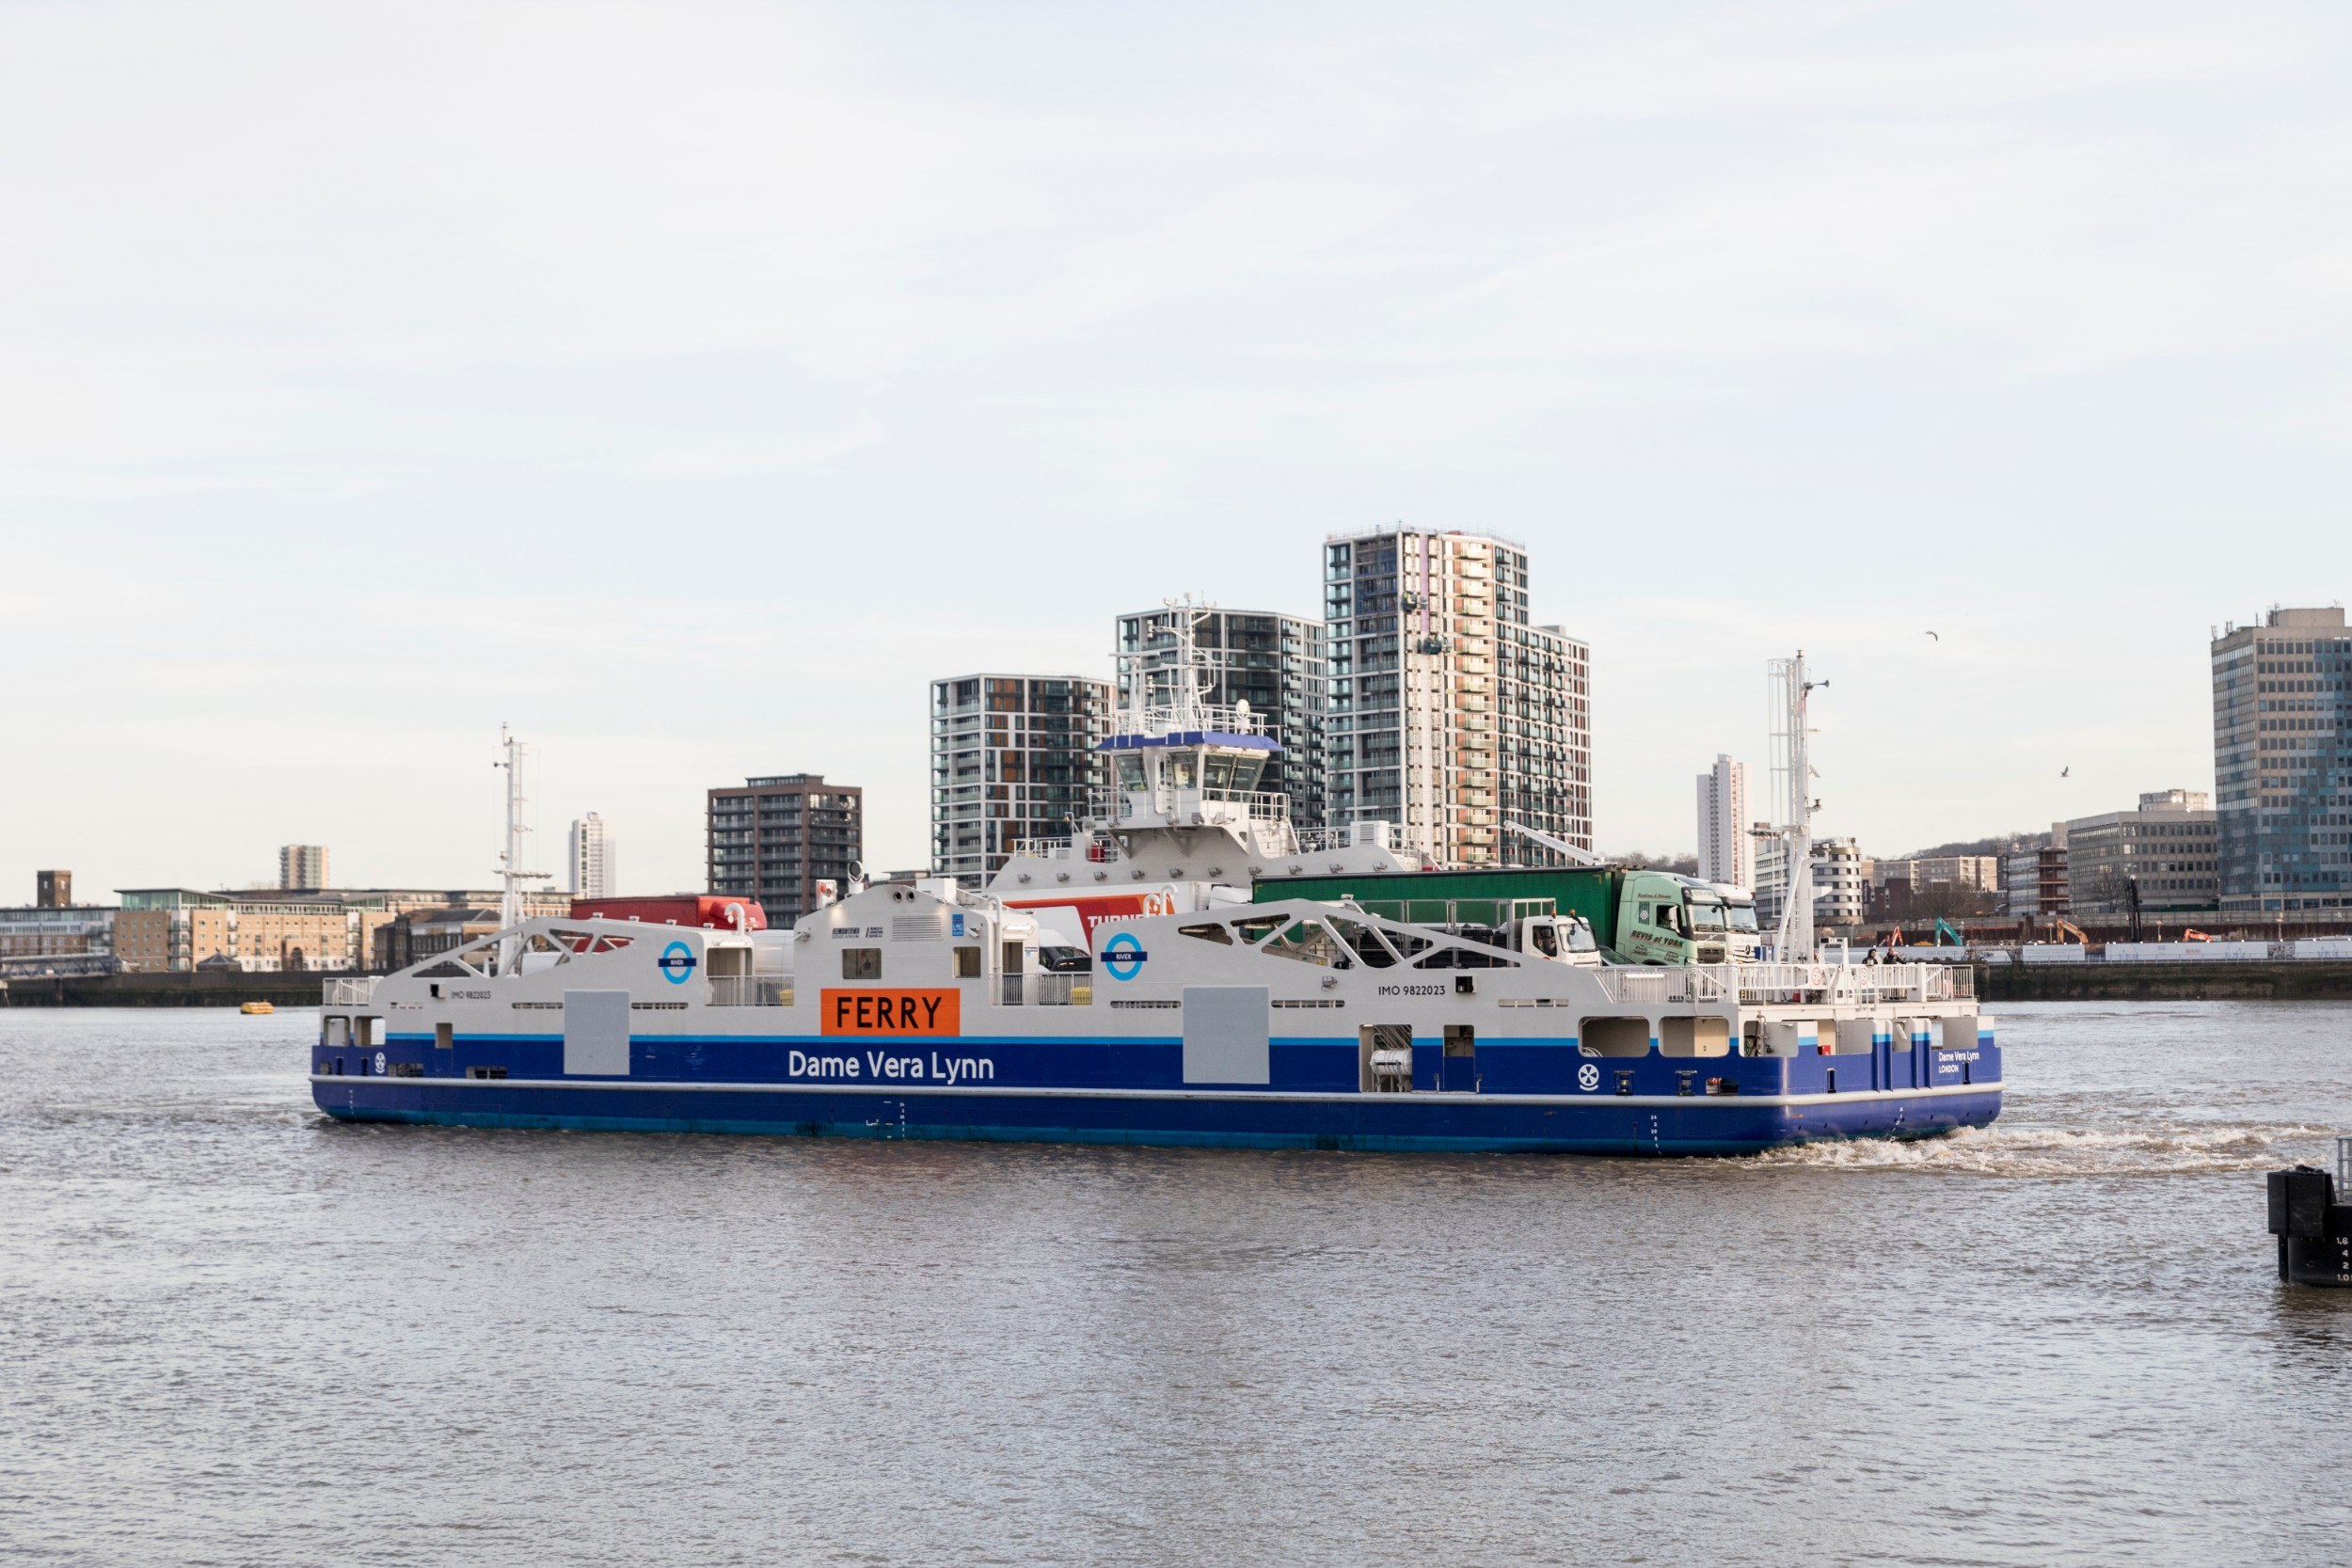 The new model of the Woolwich Ferry on the water